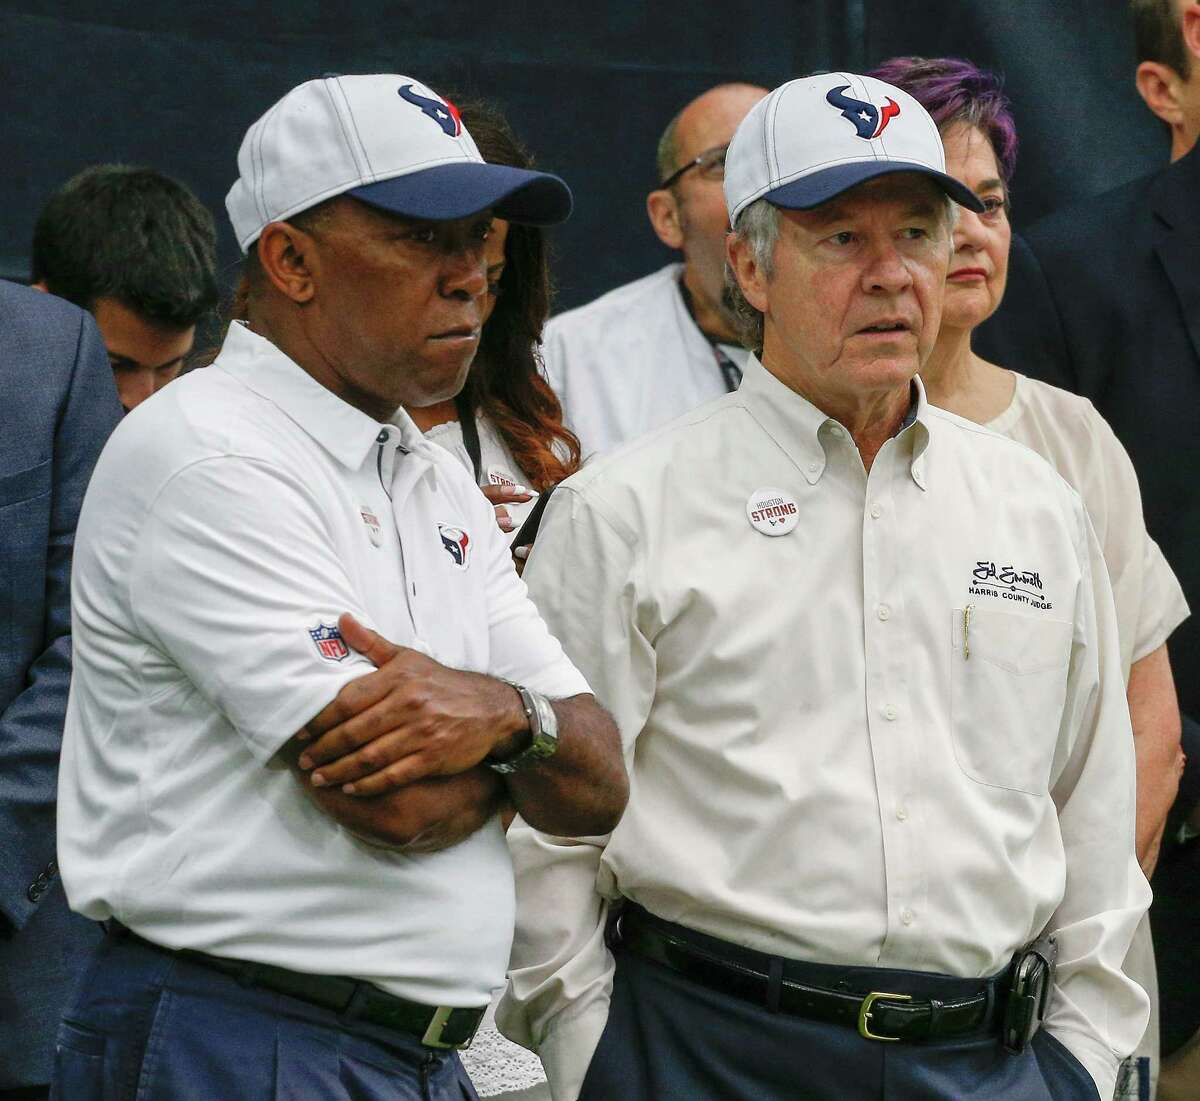 HOUSTON, TX - SEPTEMBER 10: Houston mayor Sylvester Turner (L) and Harris County Judge Ed Emmett watch from the sidelines before the Houston Texans played the Jacksonville Jaguars at NRG Stadium on September 10, 2017 in Houston, Texas. (Photo by Bob Levey/Getty Images)